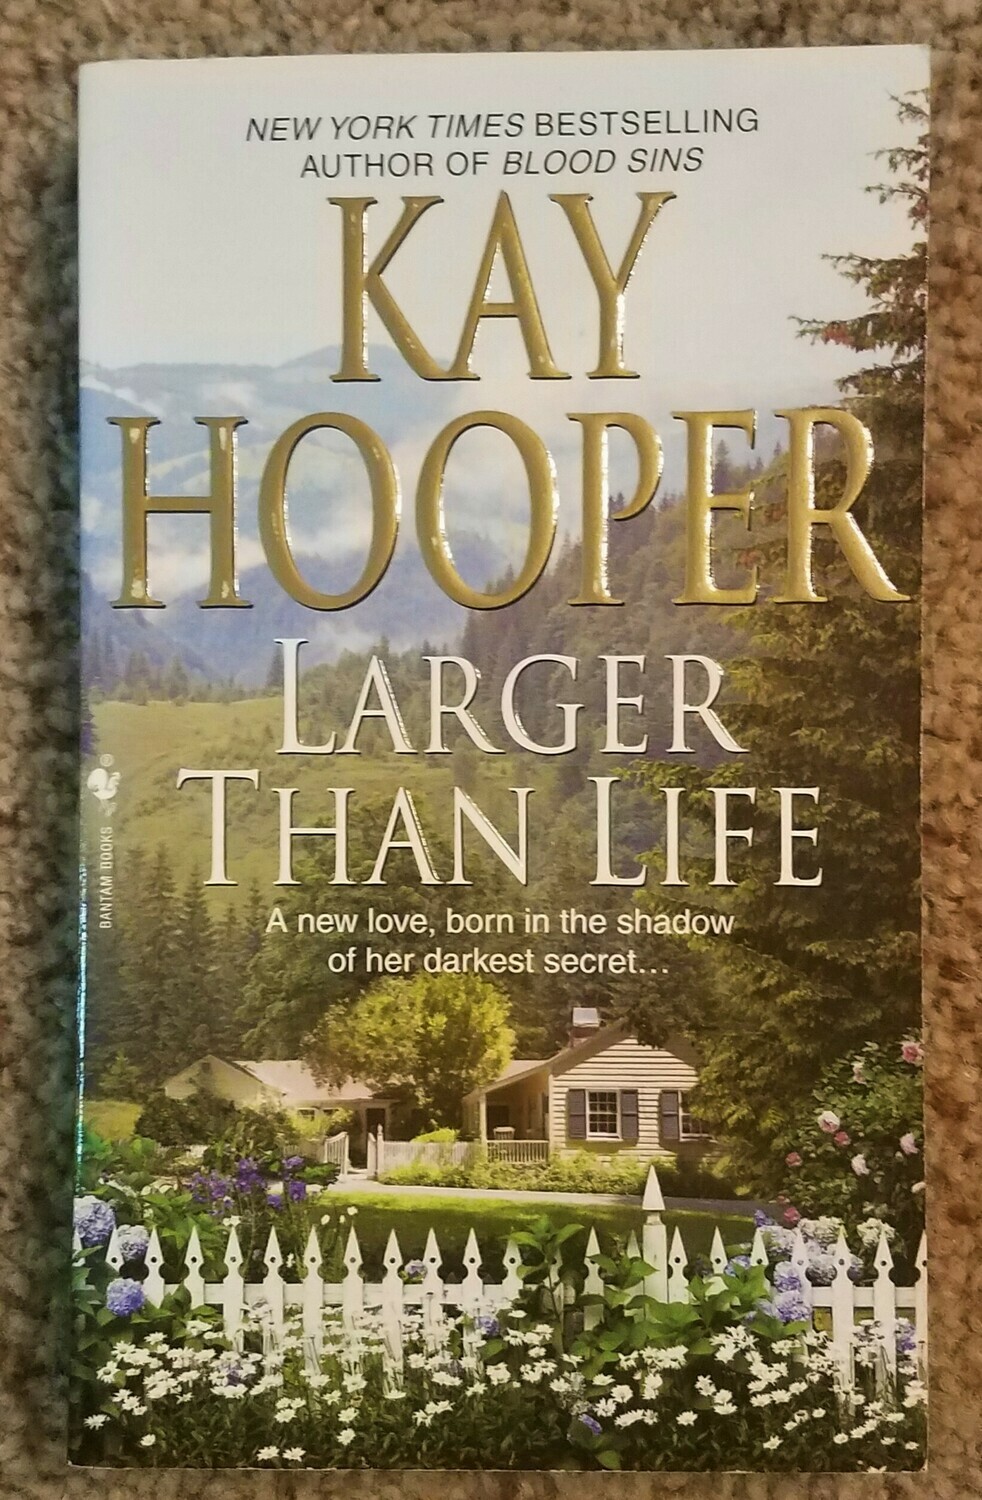 Larger Than Life by Kay Hooper